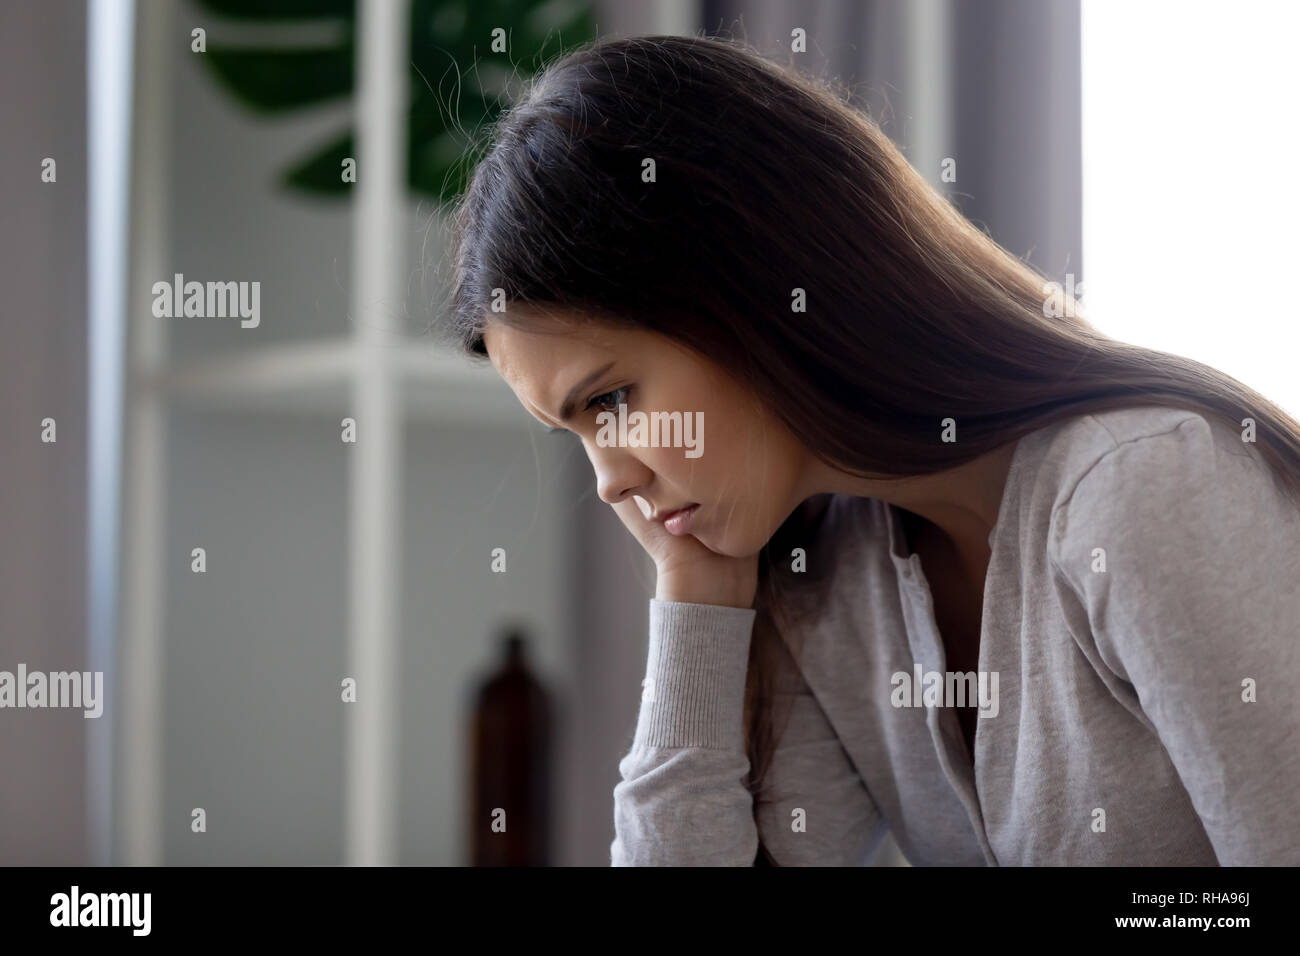 Gloomy upset young woman feeling bad depressed and lonely Stock Photo